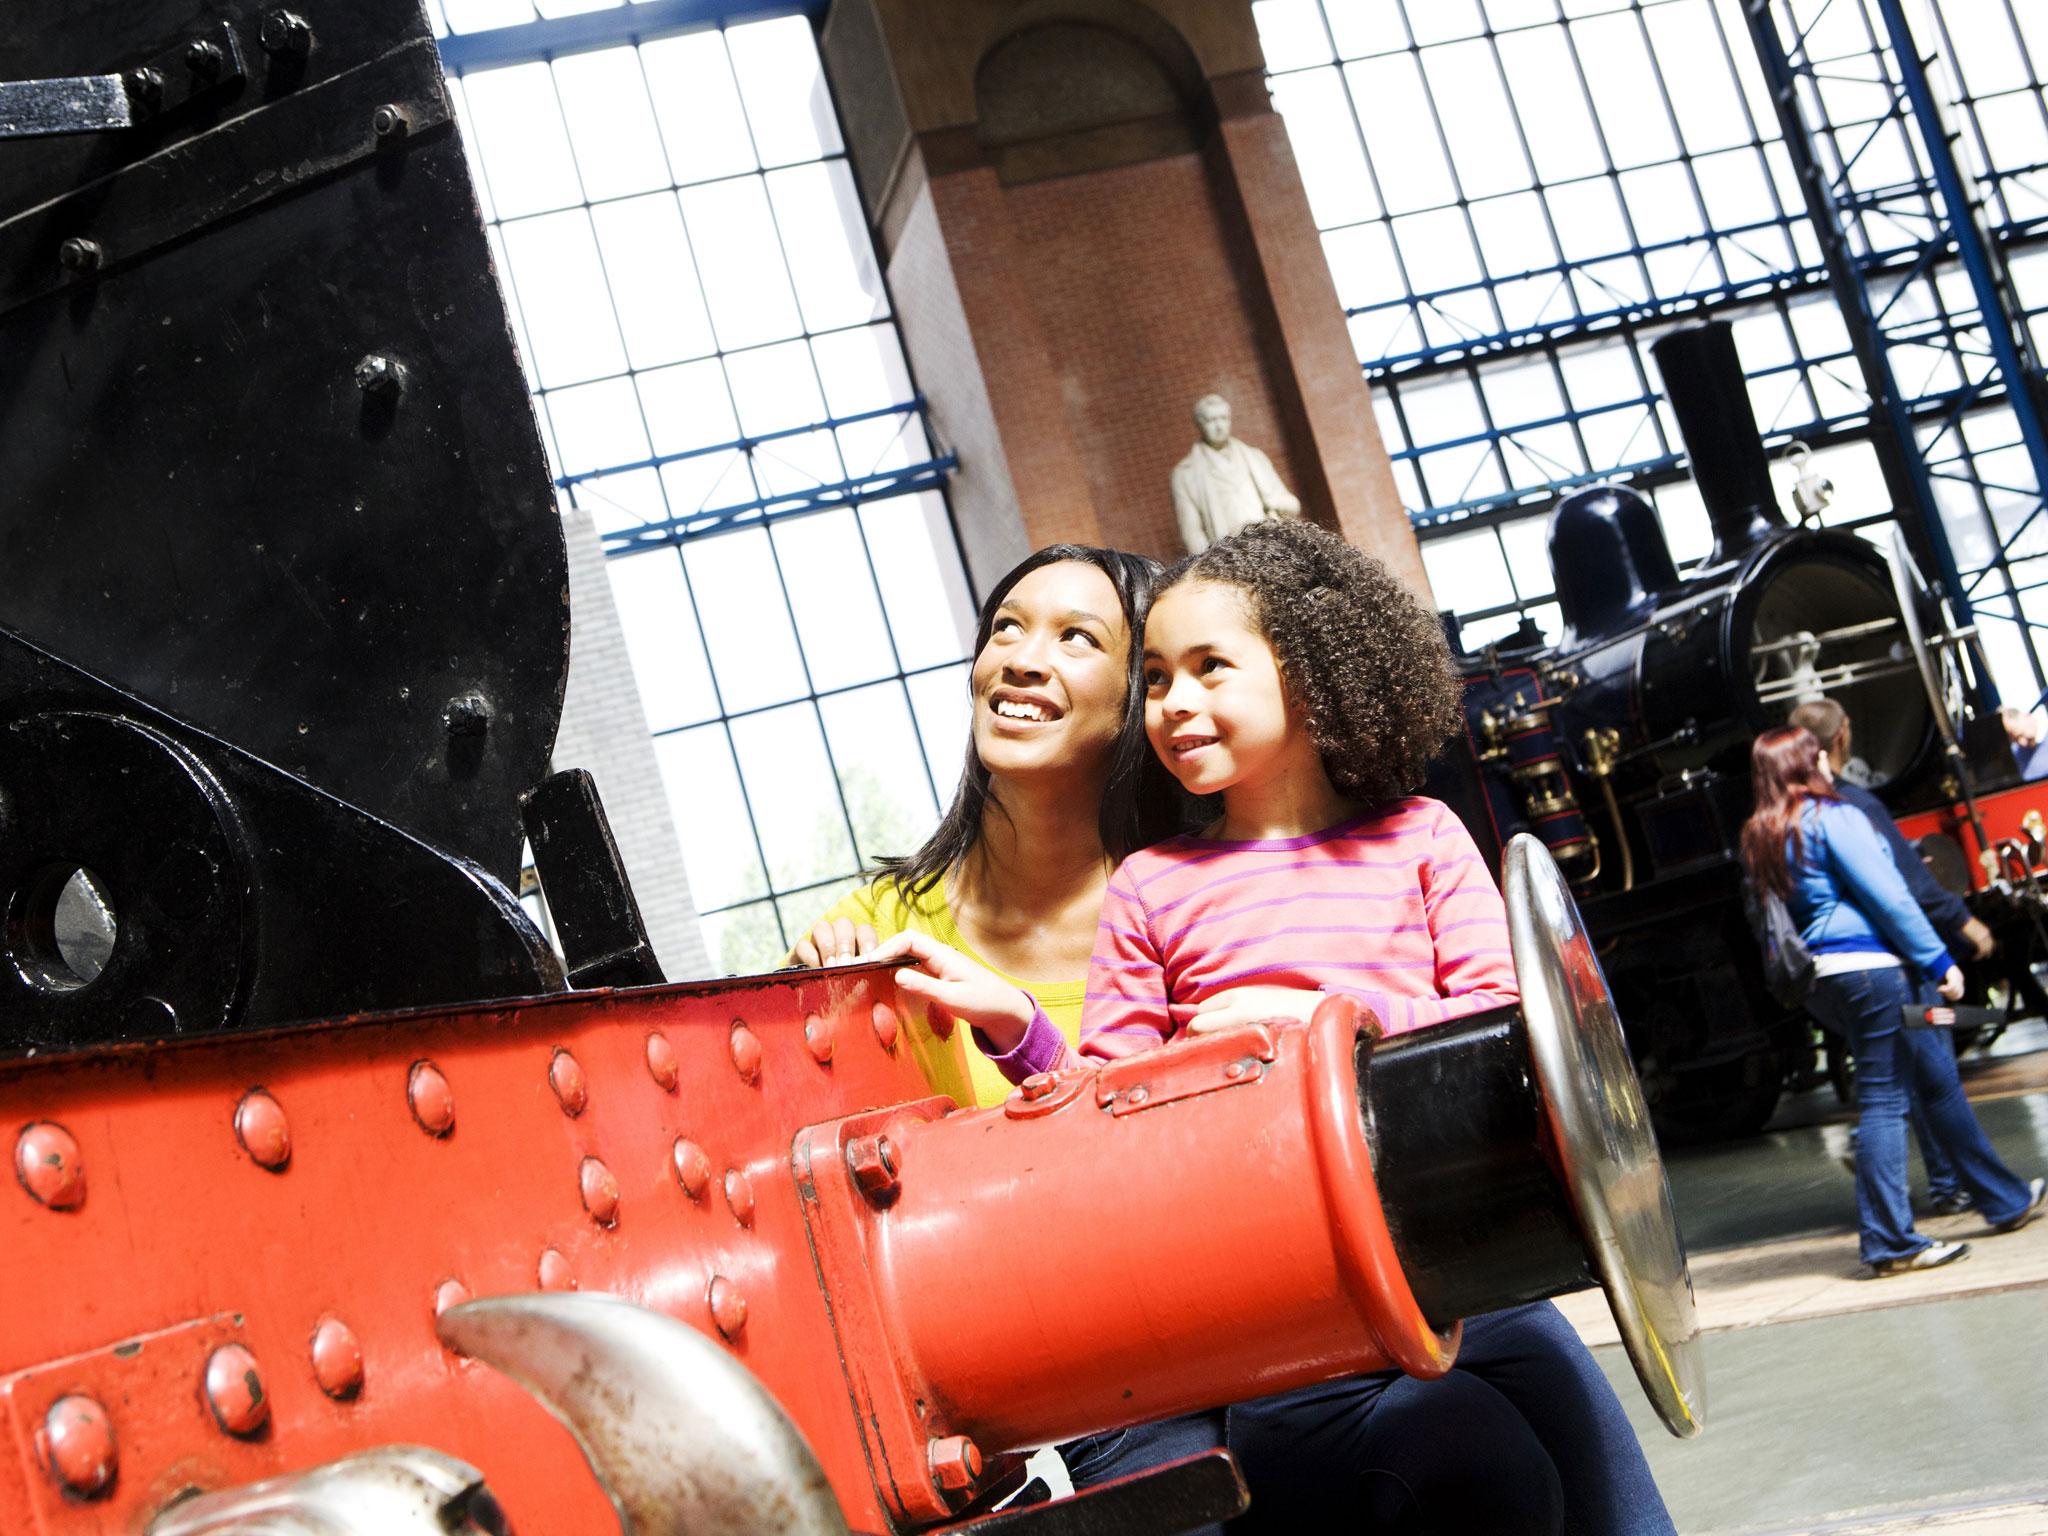 The National Railway Museum in York is running family-friendly events